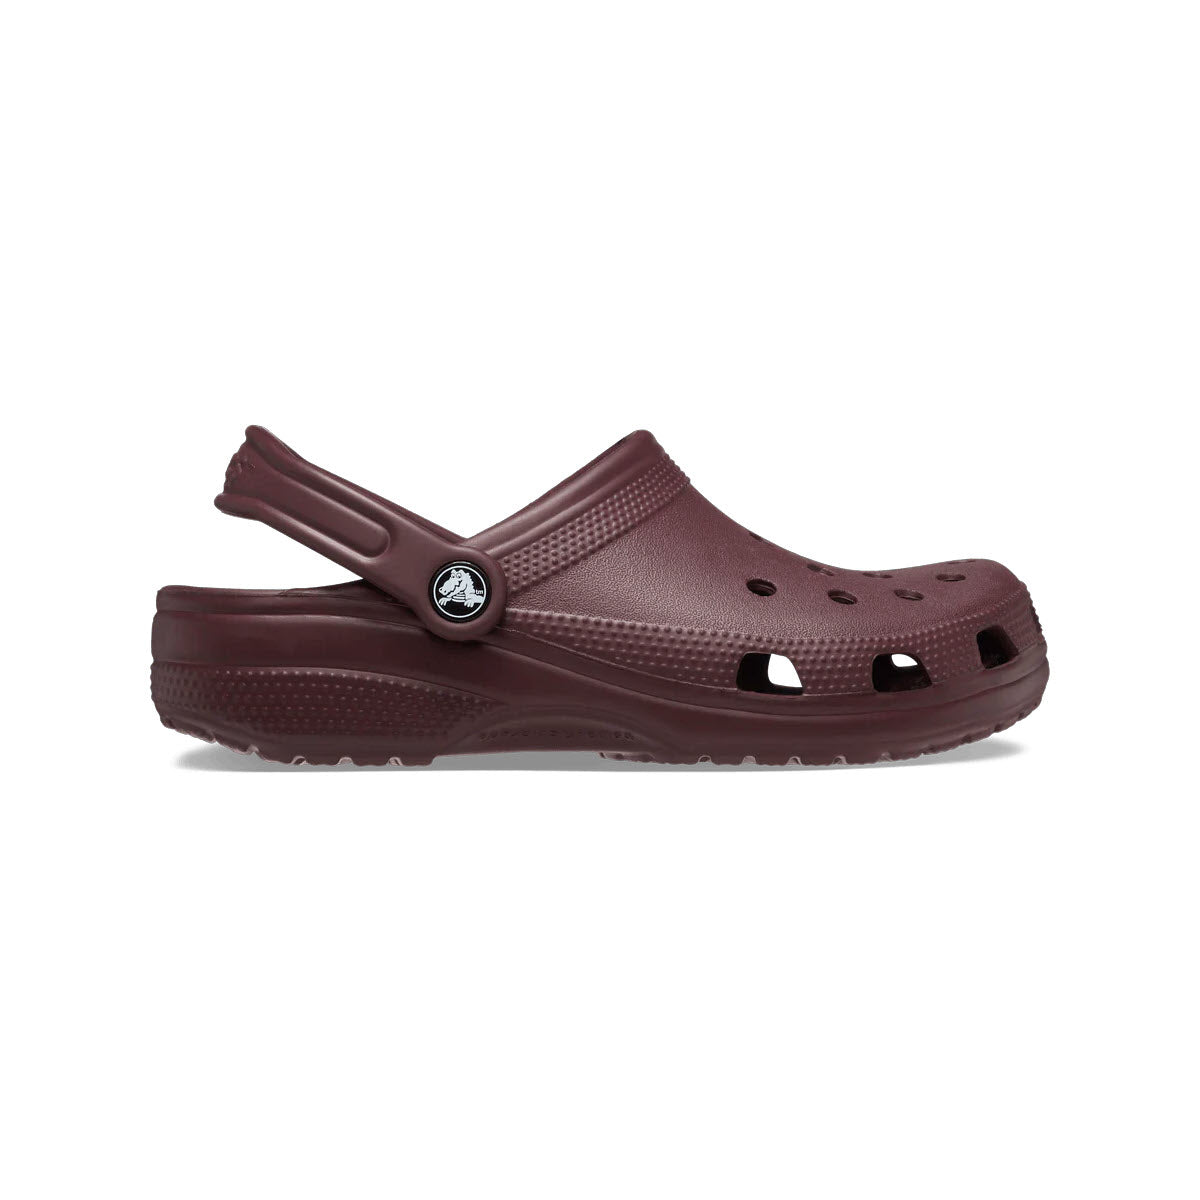 Crocs Slides - Classic Slipper - 203600-060 - Online shop for sneakers,  shoes and boots